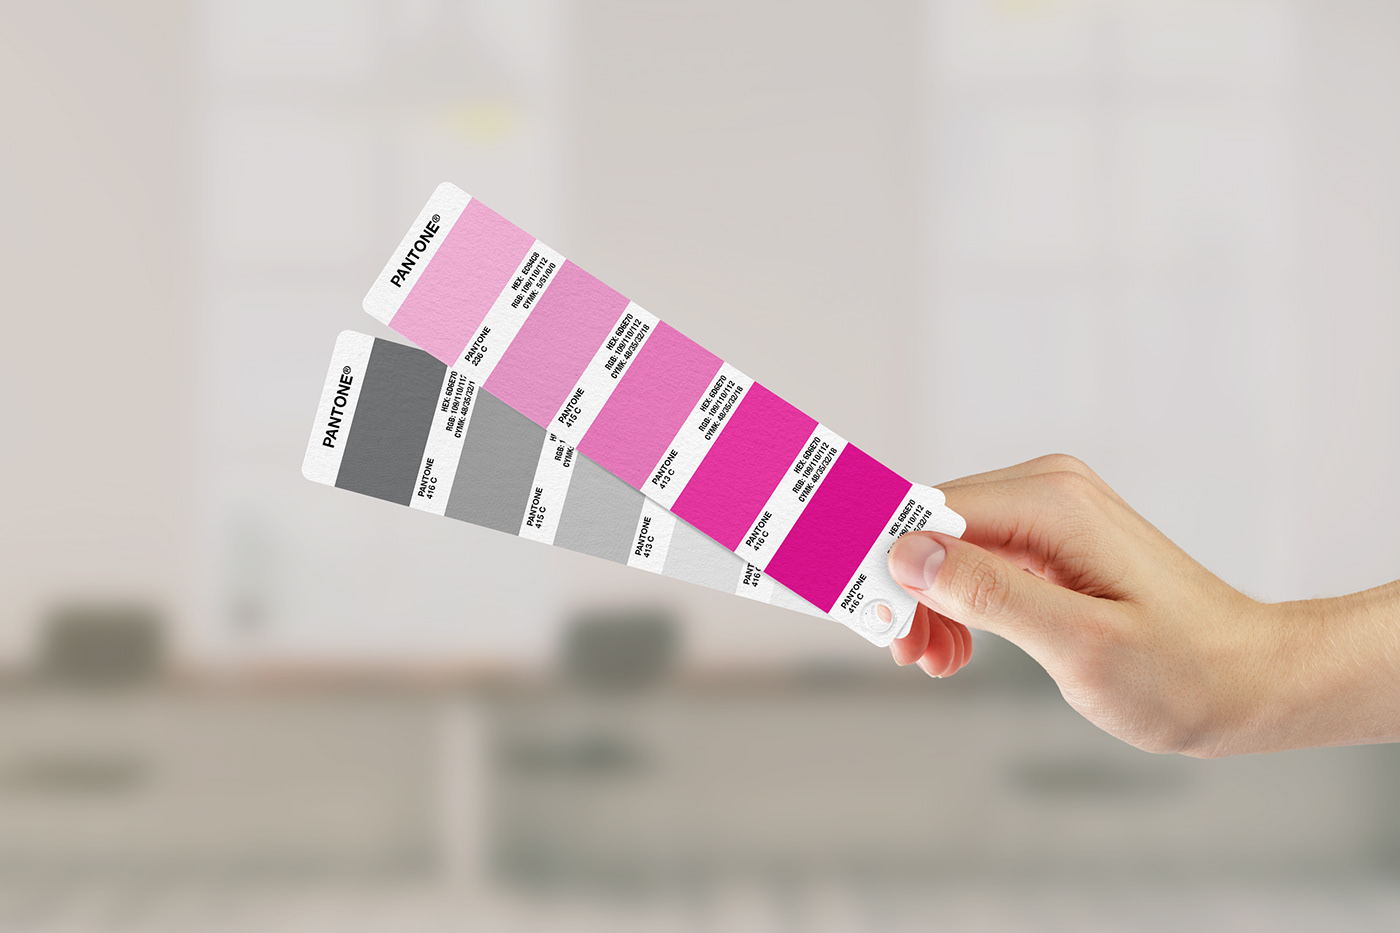 Pantone color book mockup for logos desired color combo.